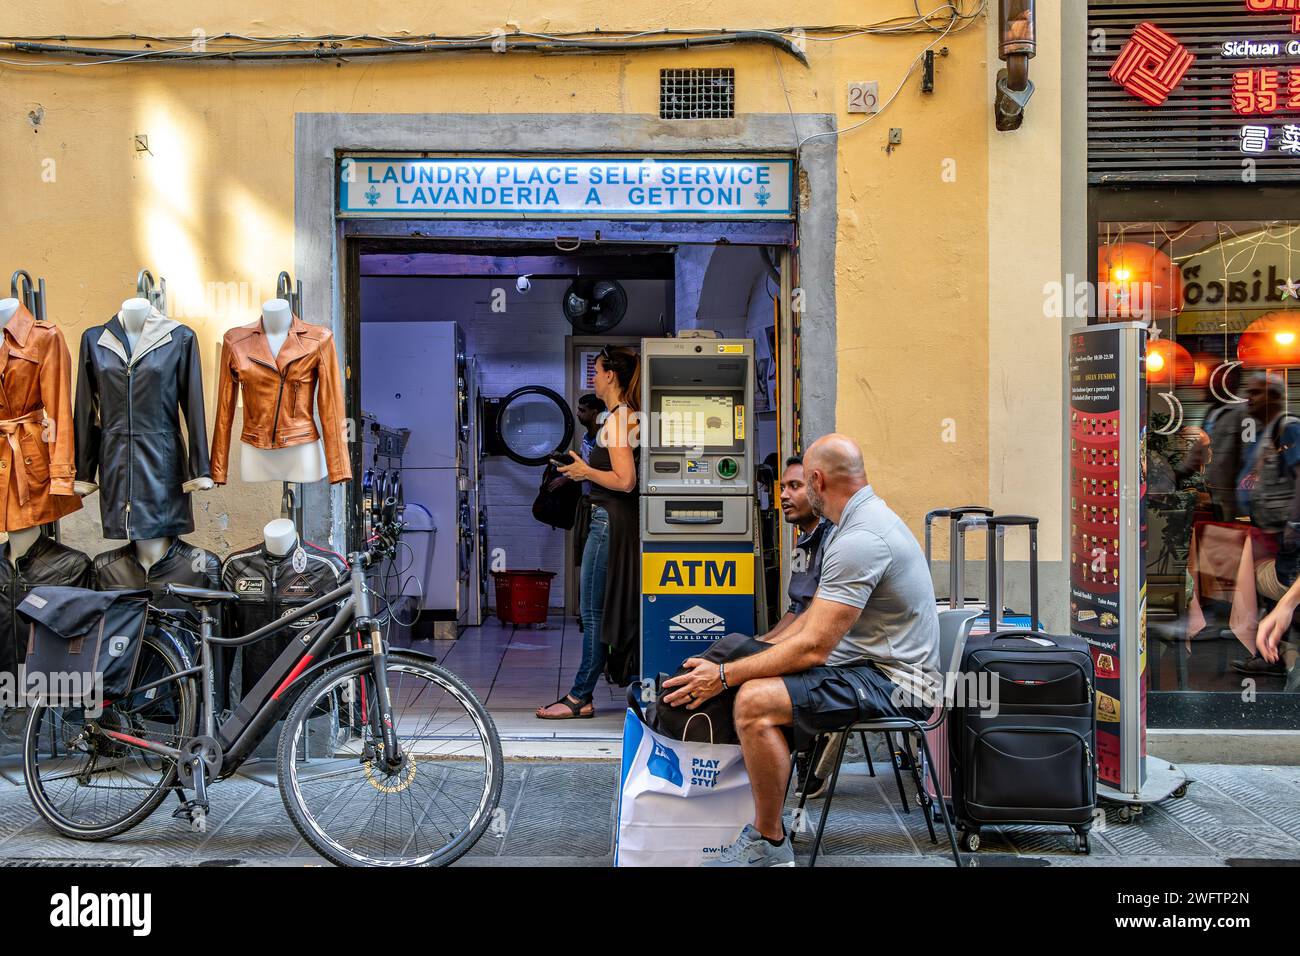 A woman using a launderette, lavanderia a gettoni, with two men sitting down outside waiting on Via Faenza, a street in Florence,Italy Stock Photo